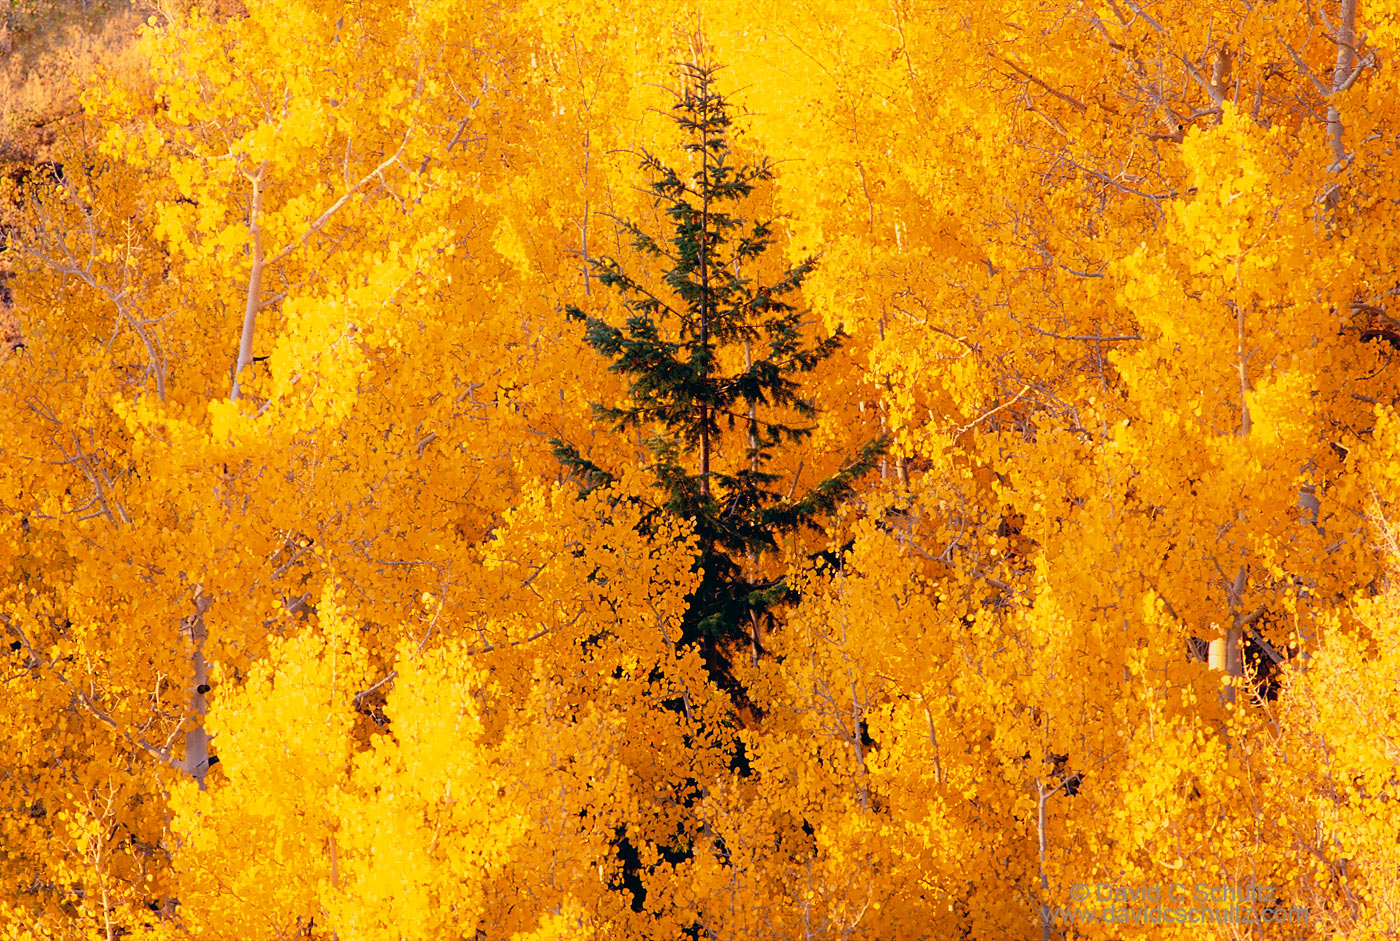 Colorful fall aspen trees in the Dixie national Forest, Utah - Image #3-1372